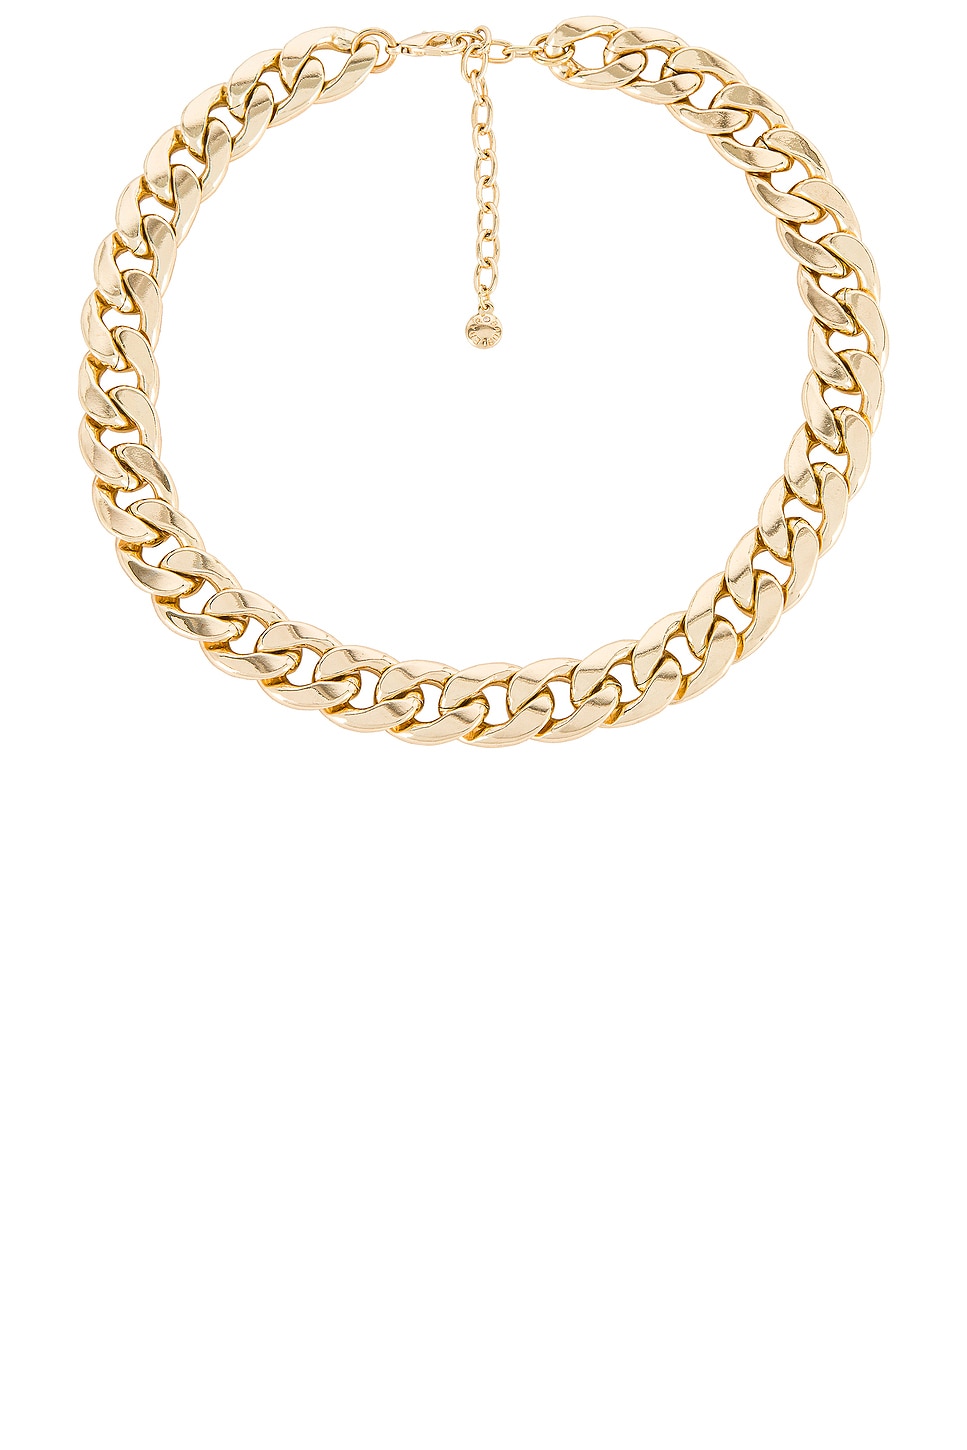 BaubleBar Michaela Curb Chain Necklace in Gold | REVOLVE